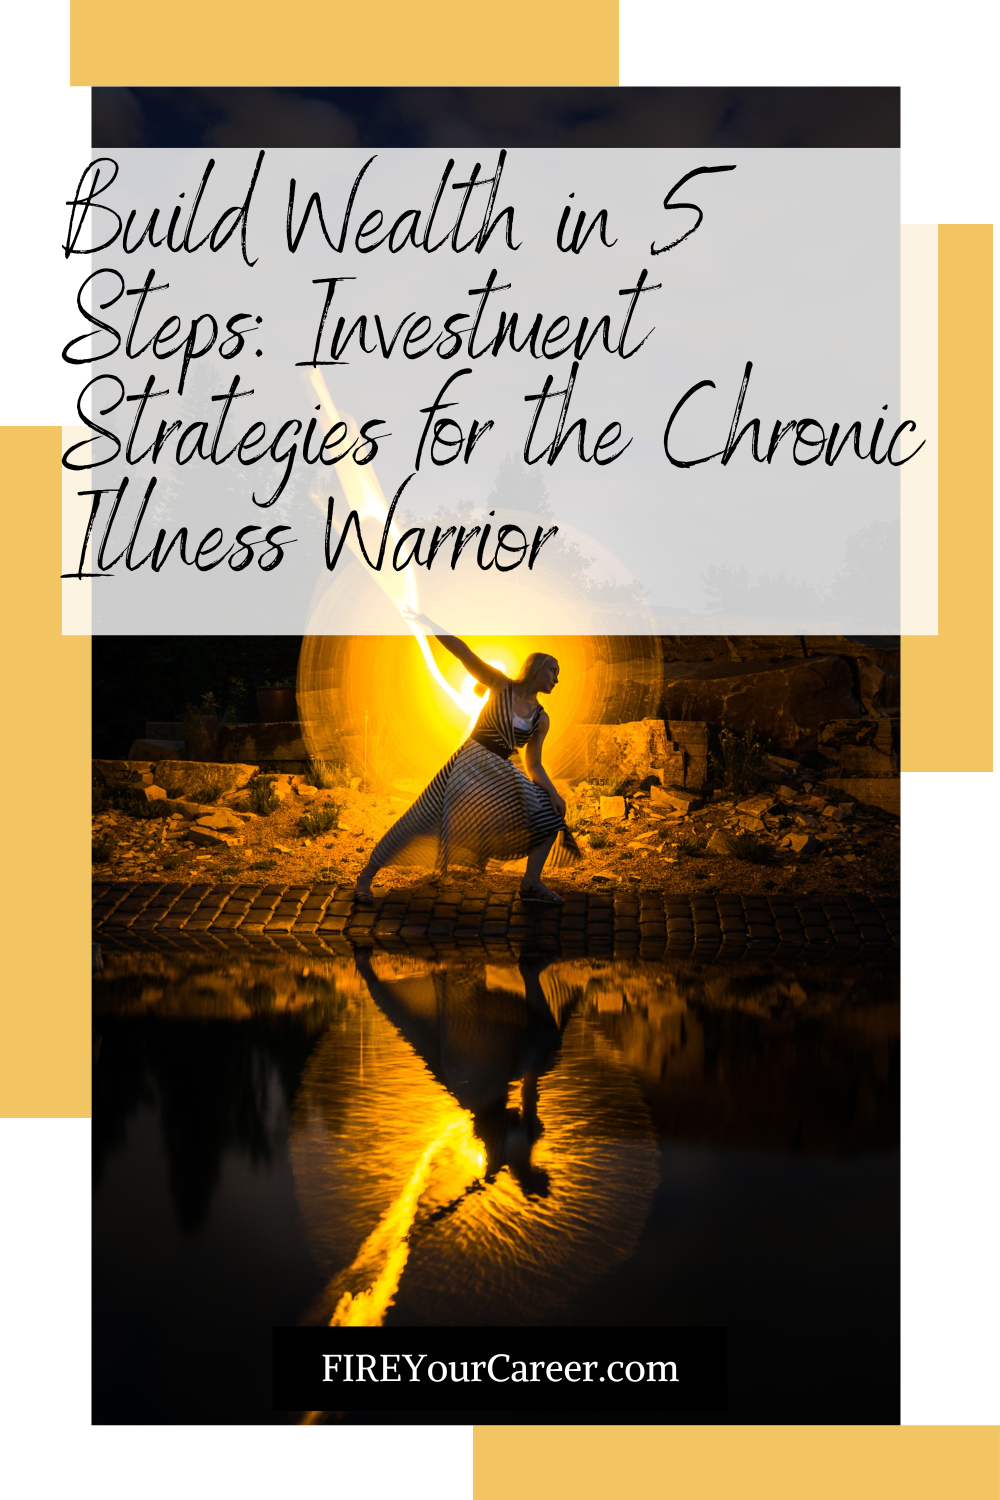 Build Wealth in 5 Steps Investment Strategies for the Chronic Illness Warrior Pinterest